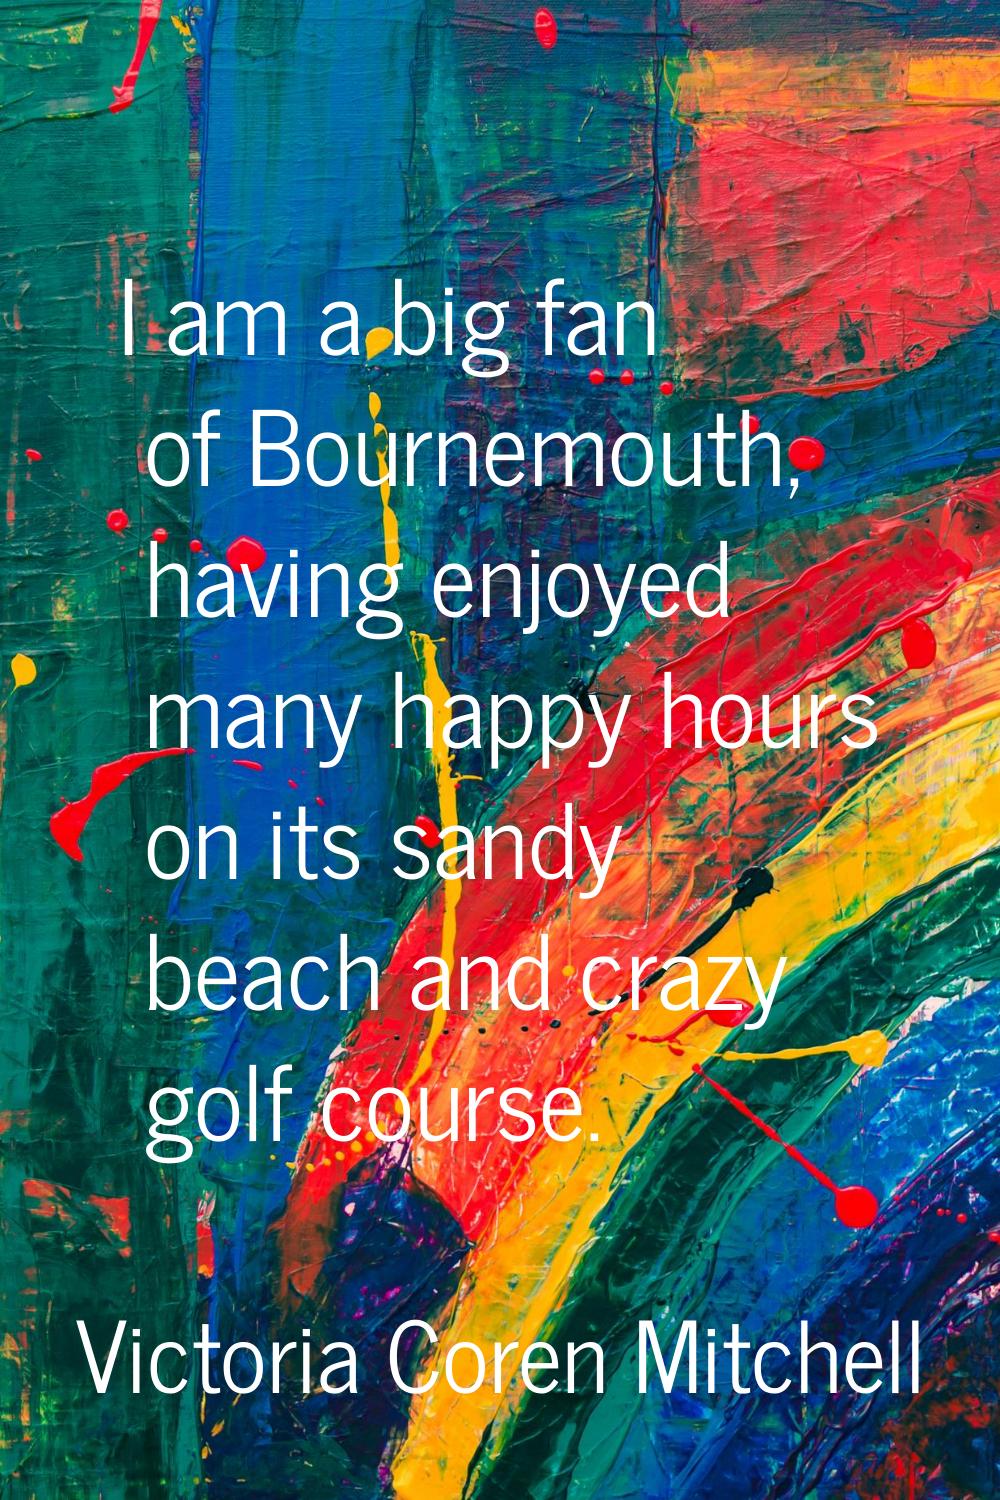 I am a big fan of Bournemouth, having enjoyed many happy hours on its sandy beach and crazy golf co